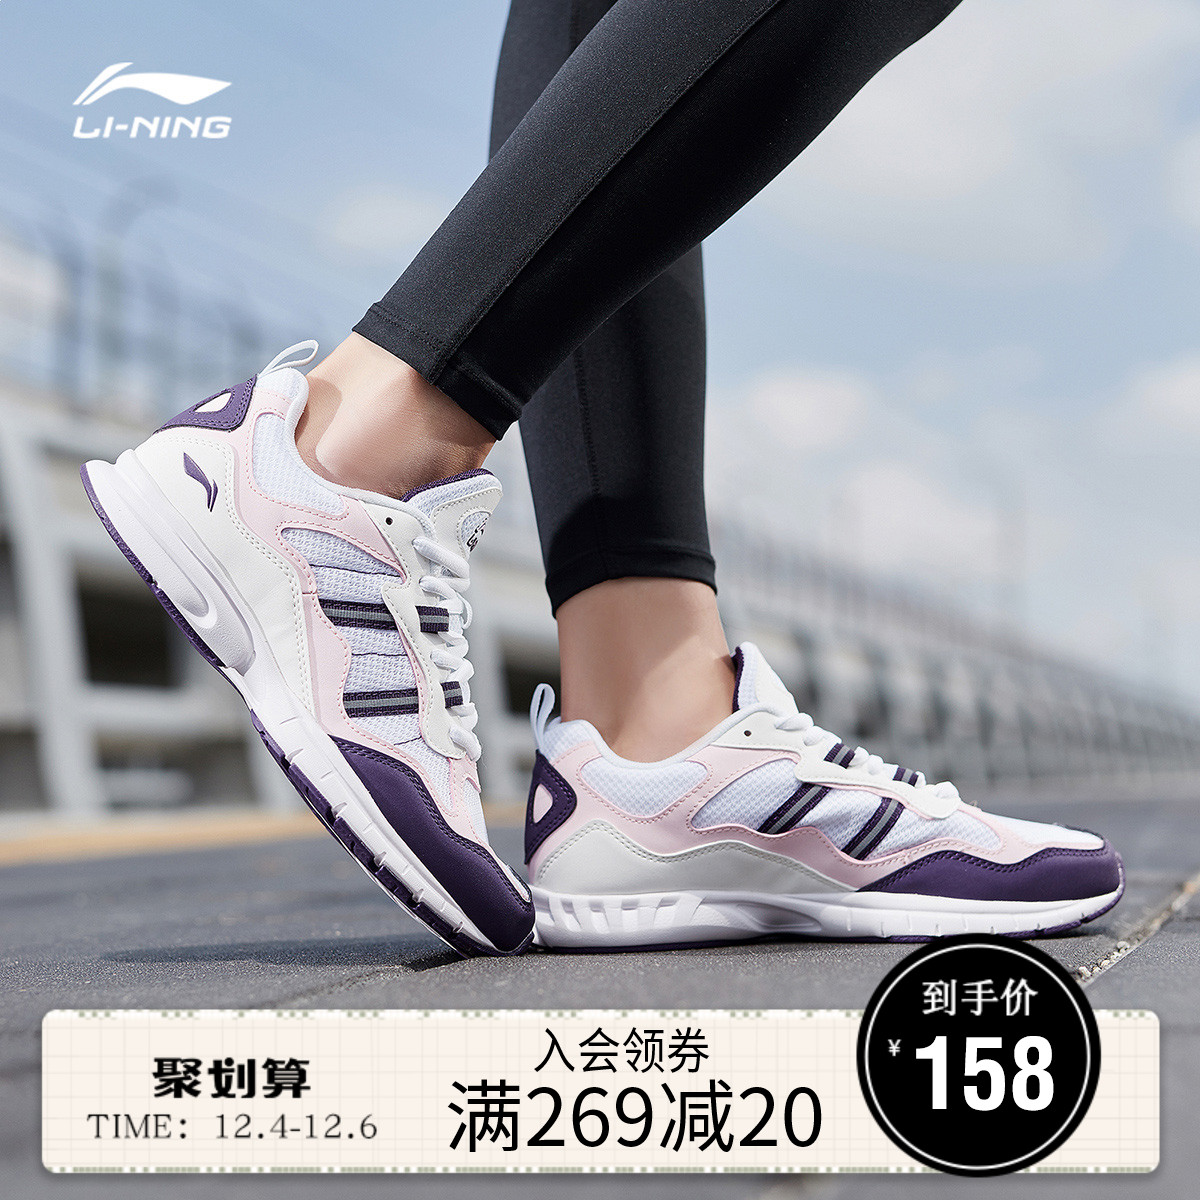 Li Ning Running Shoes Women's Shoes 2019 New Couple Shoes Morning Running Shoes Autumn and Winter Shock Absorbing Women's Sports Shoes